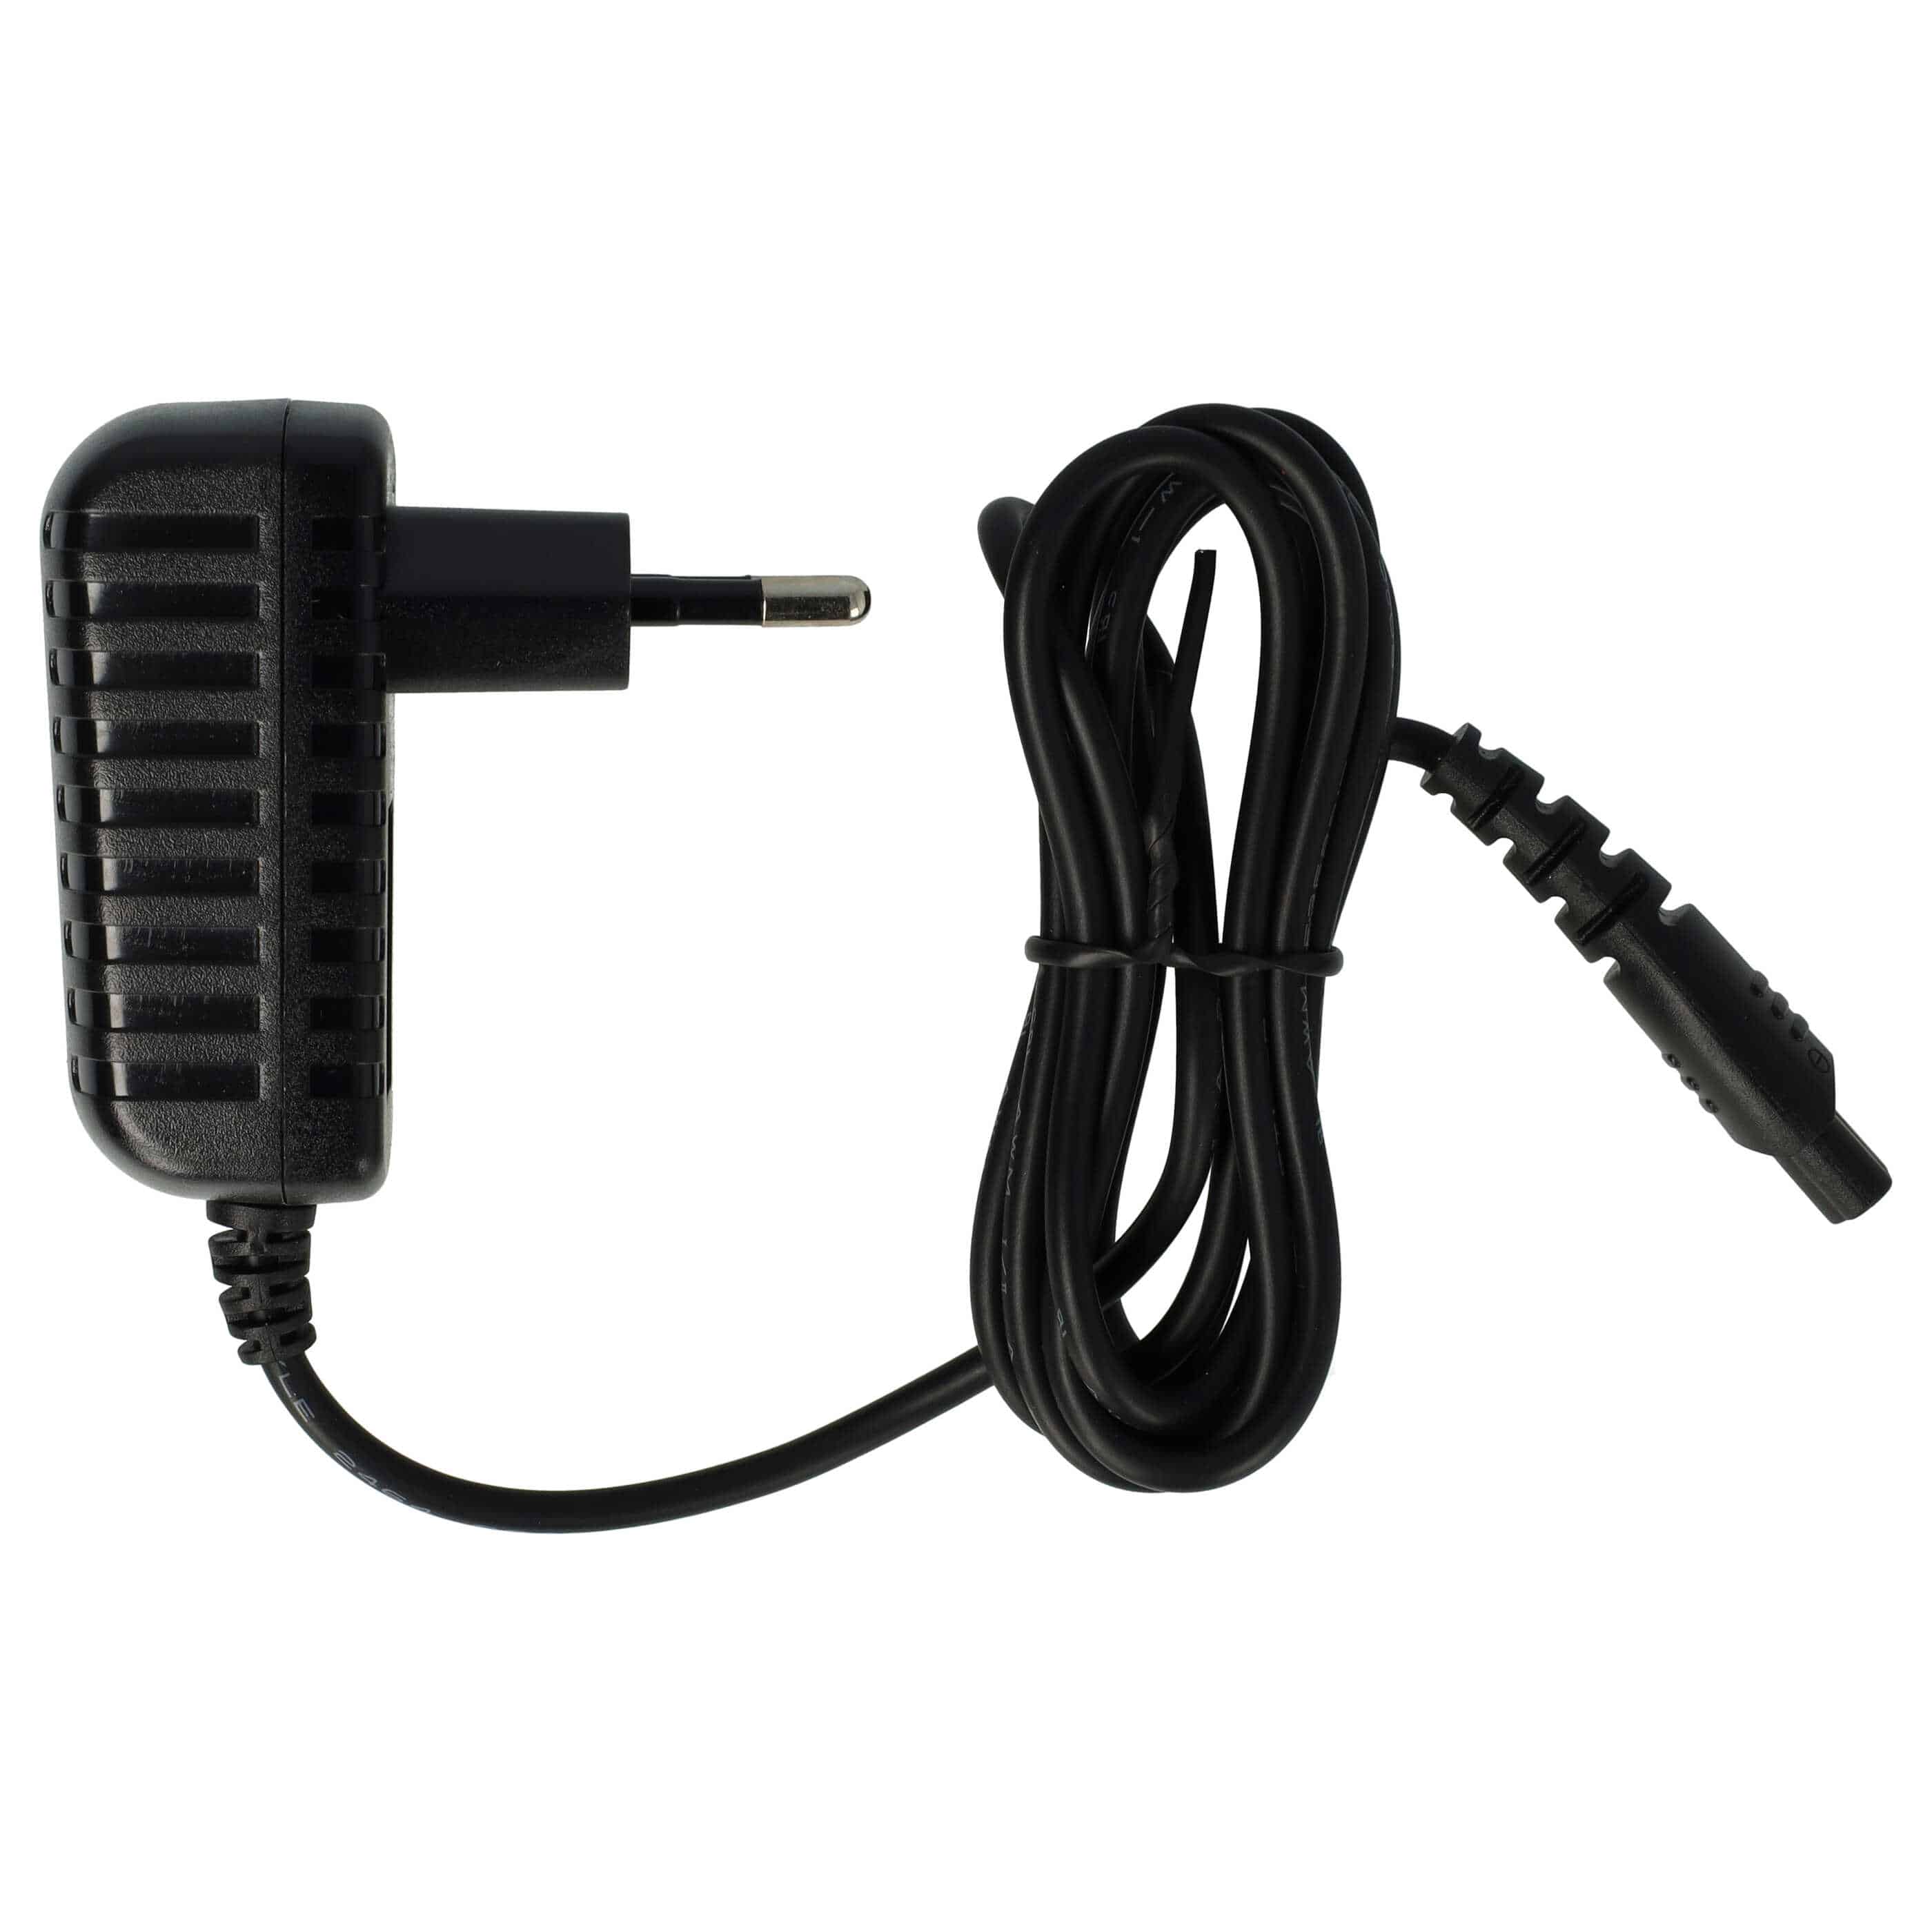 Mains Power Adapter replaces Rowenta 1800134268 for Rowenta Electric Hair Trimmer - 200 cm